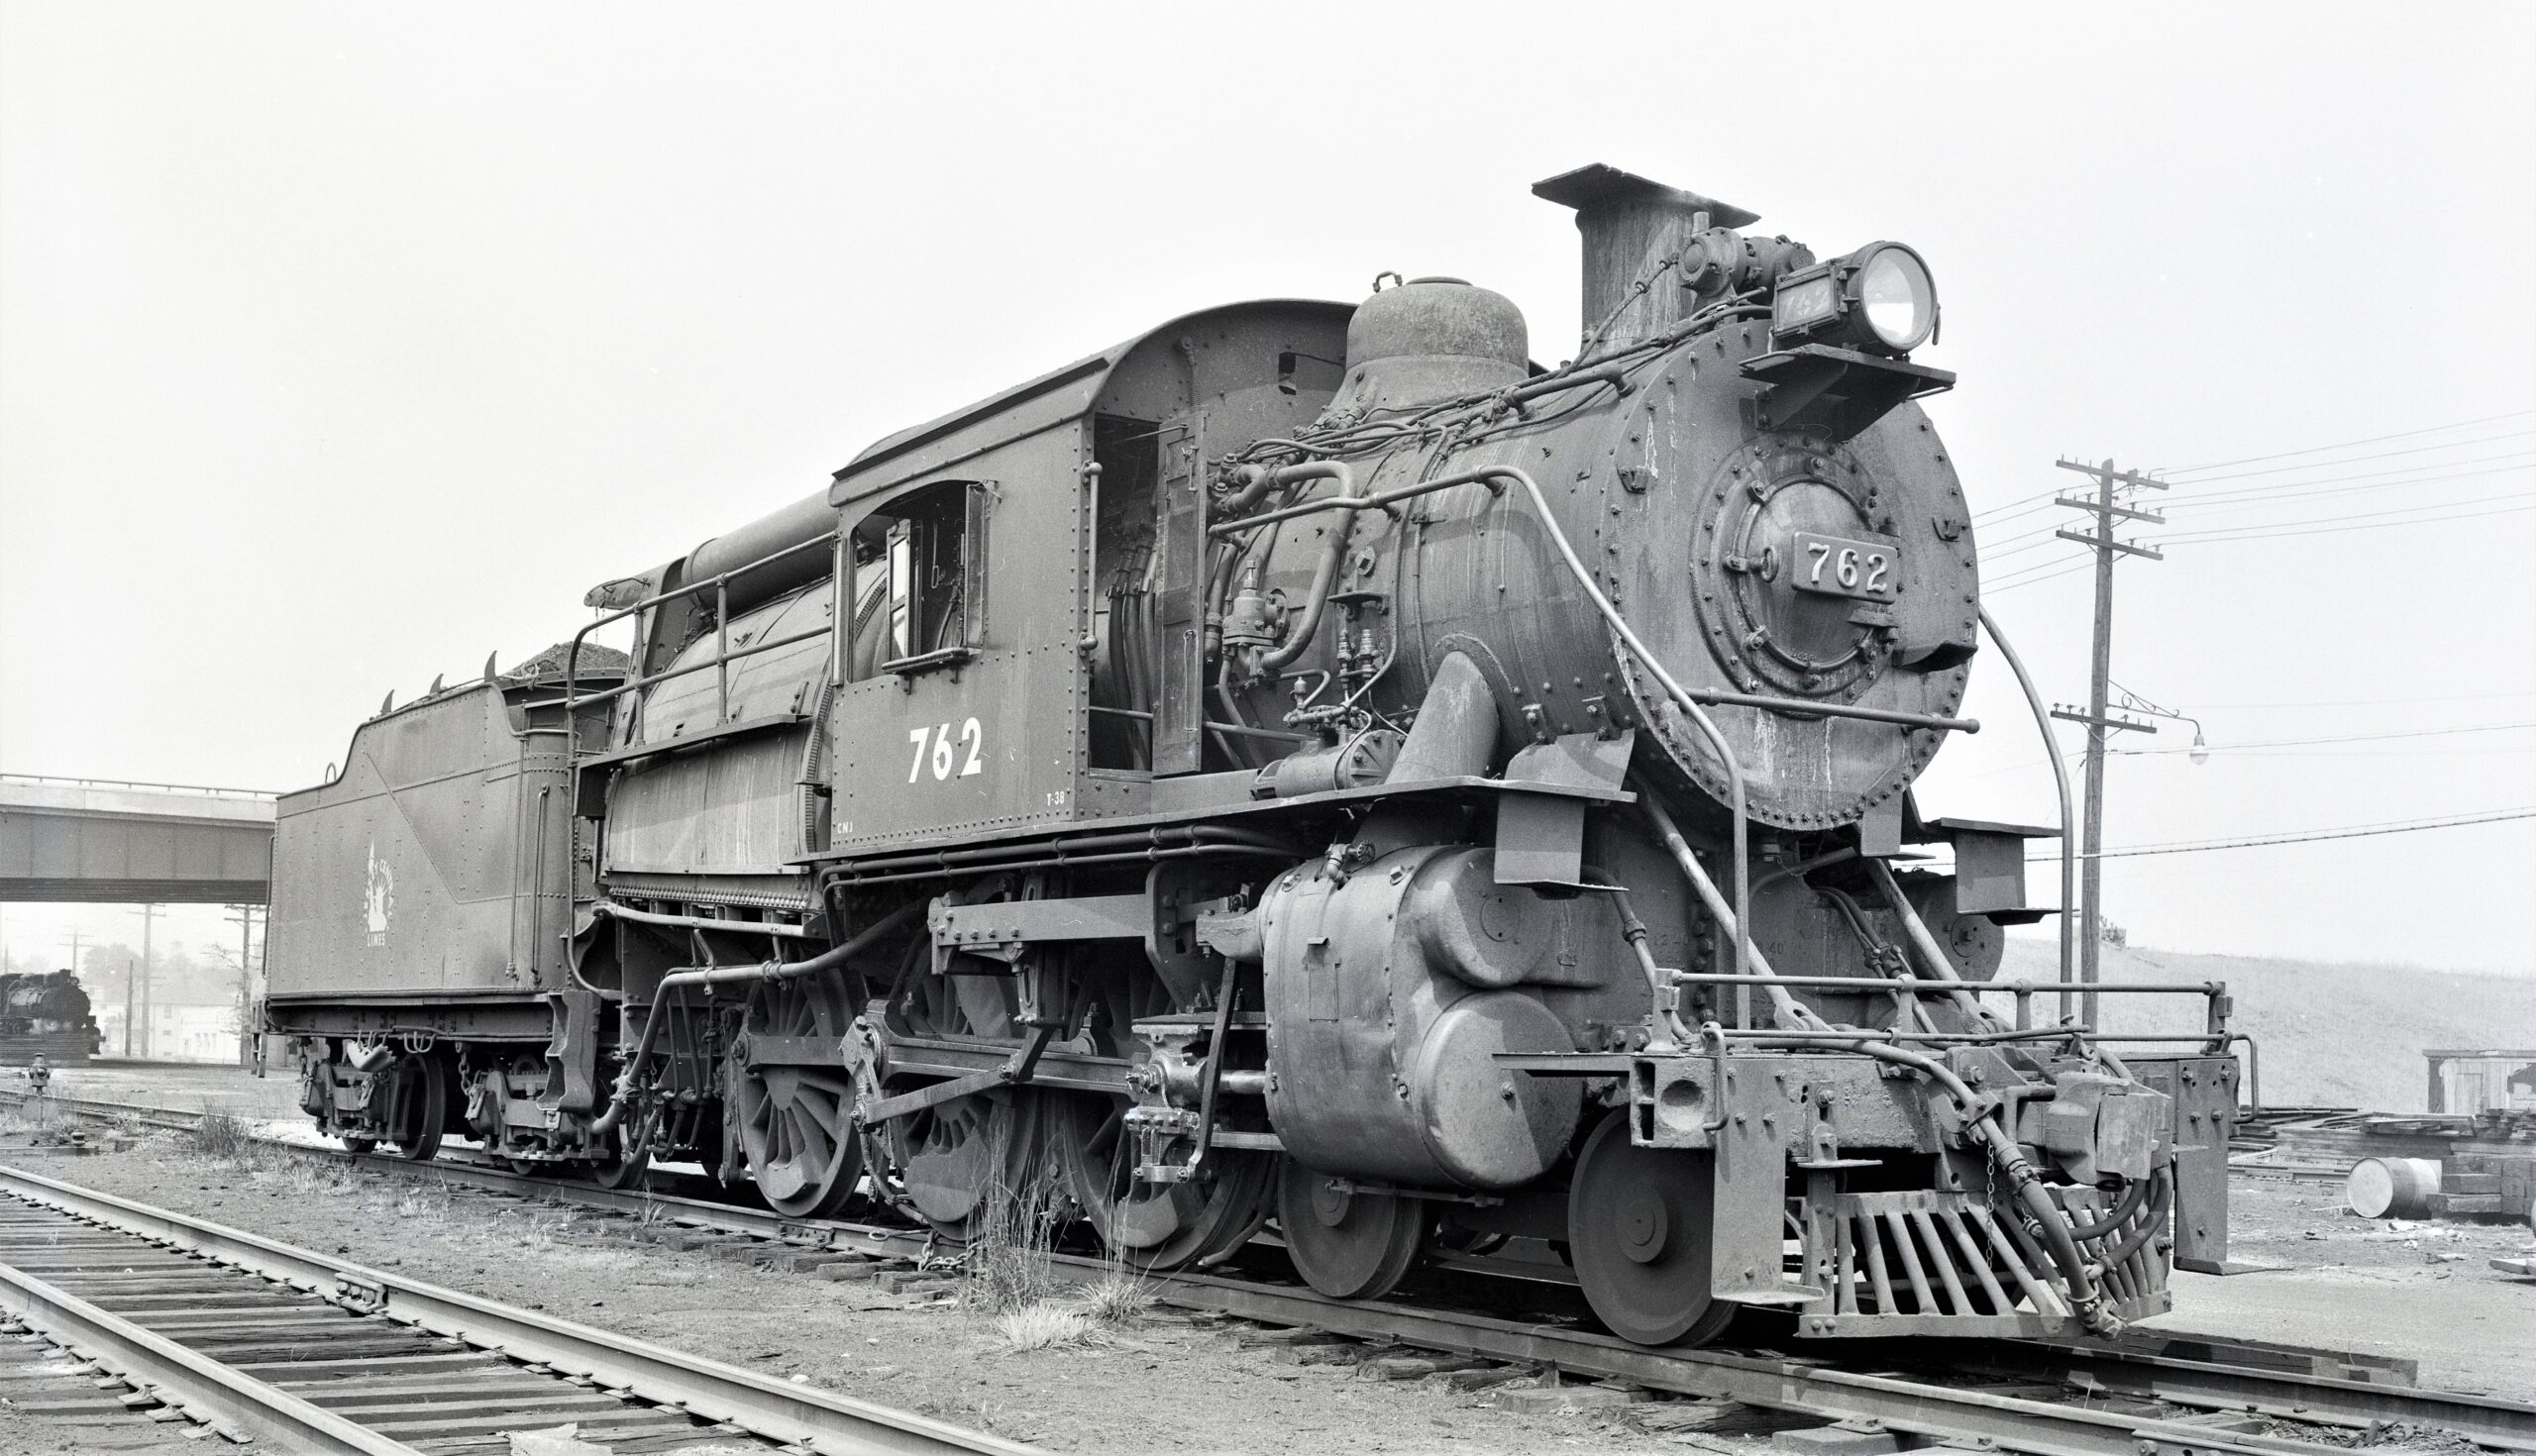 Central Railroad of New Jersey | Cranford, New Jersey | Class T38 4-6-0 #762 Camelback steam locomotive | May 17, 1953 | R. L. Long photograph